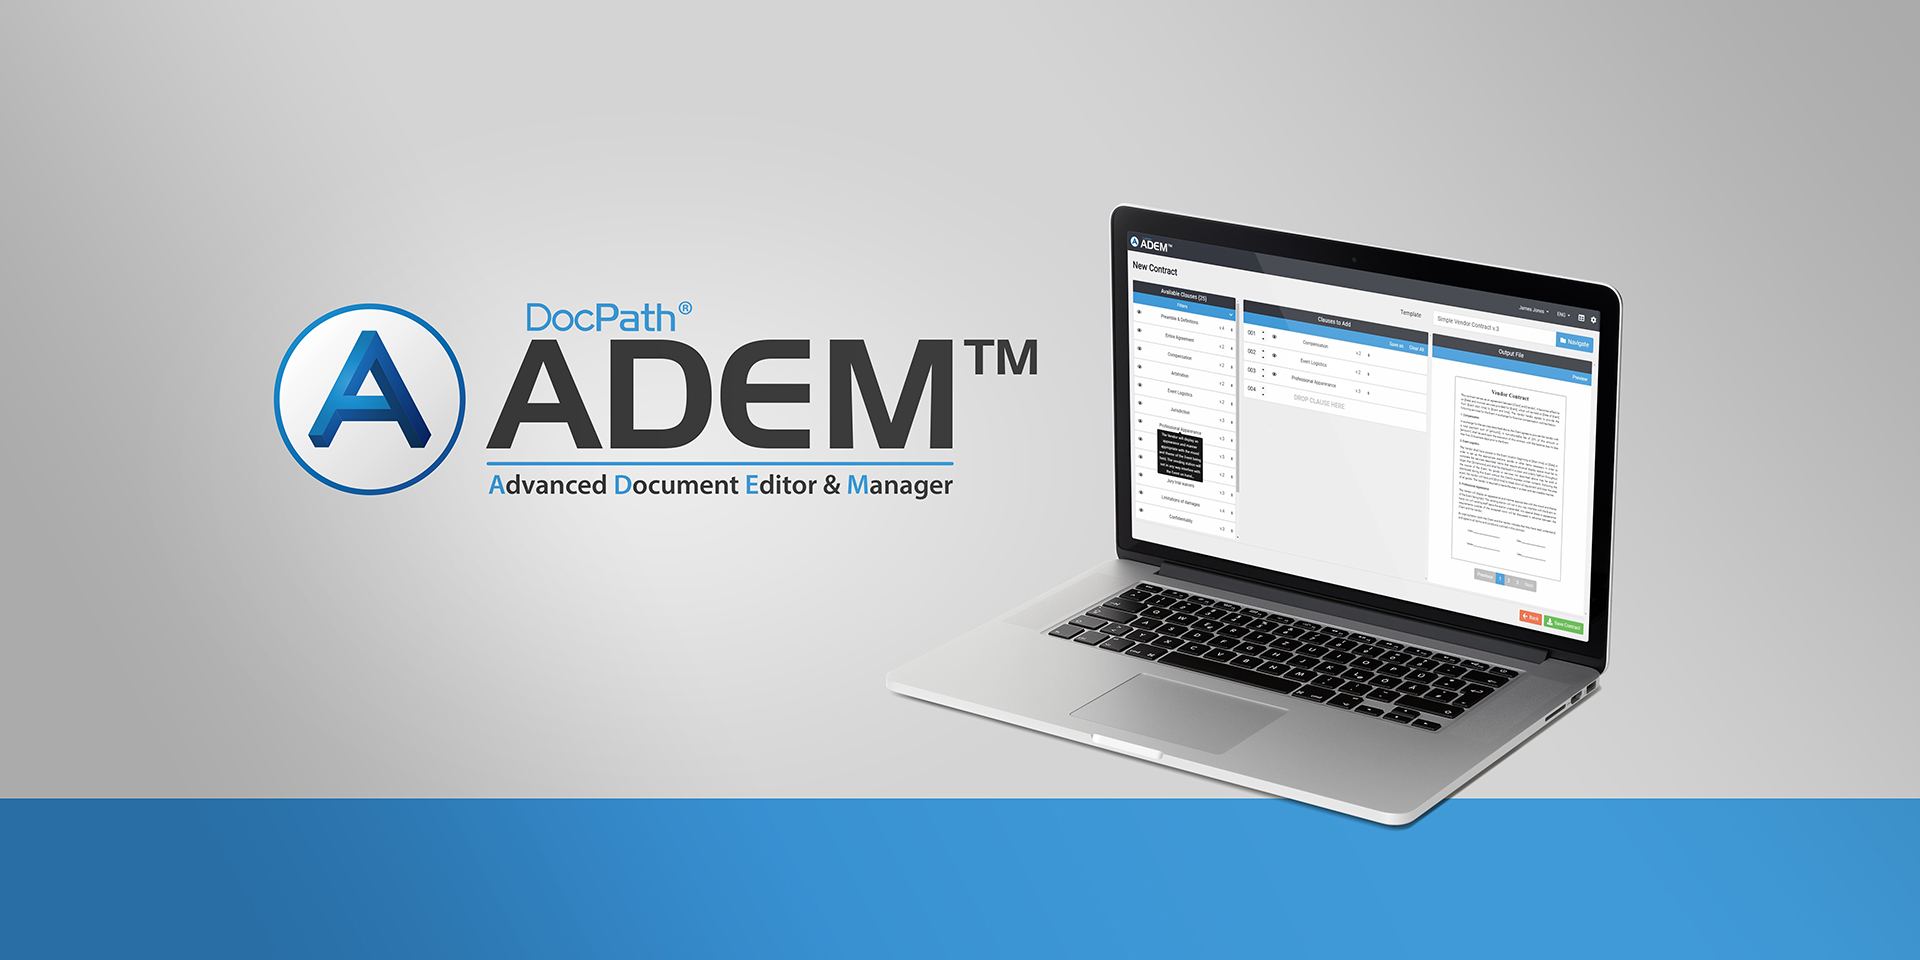 ADEM is a product that enhances even more the ease of use for non-technical users of its document software solutions suite